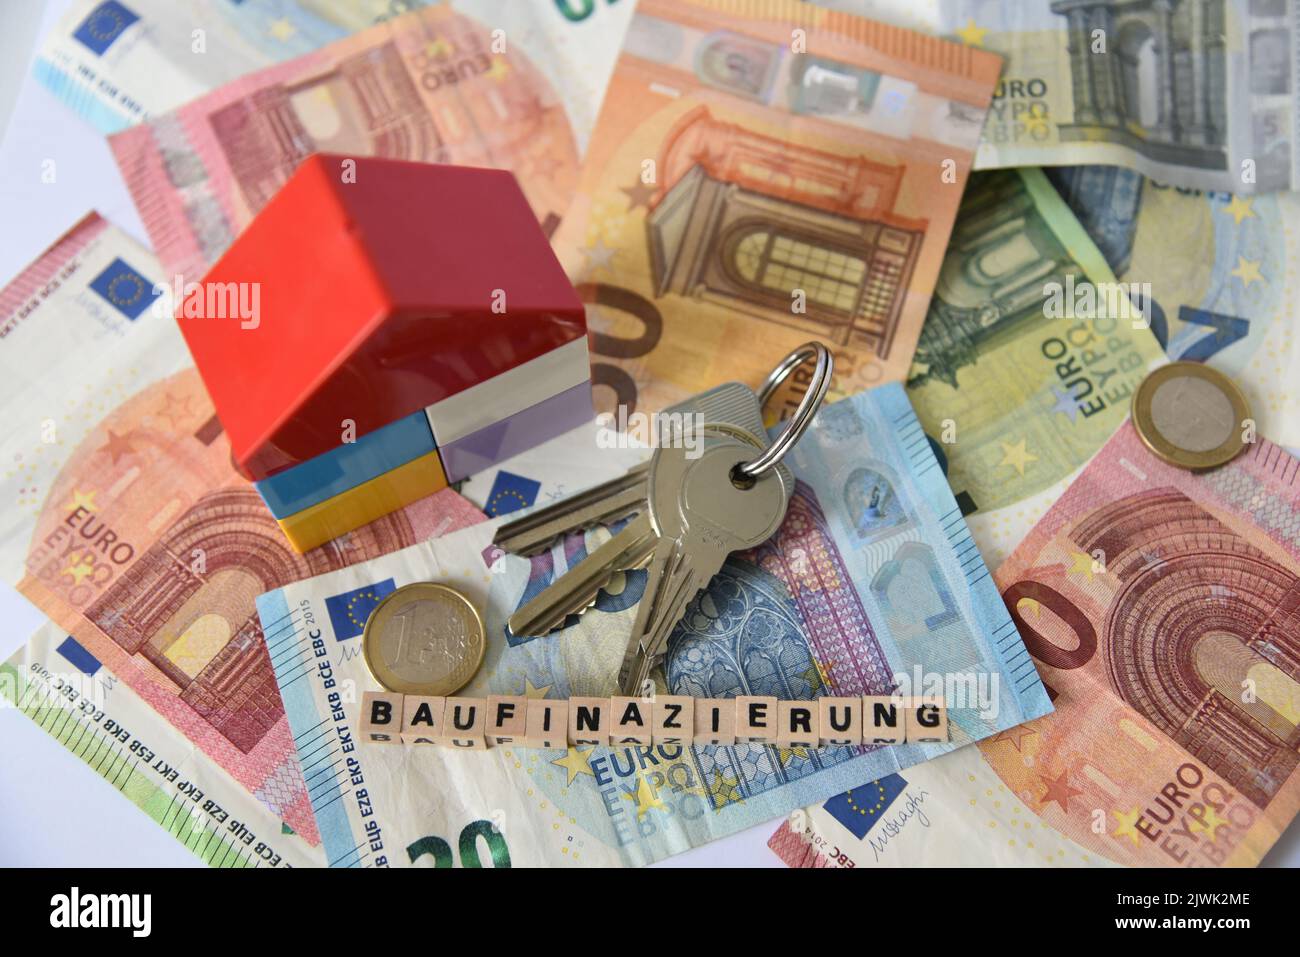 euro bank notes and the word baufinanzierung Stock Photo